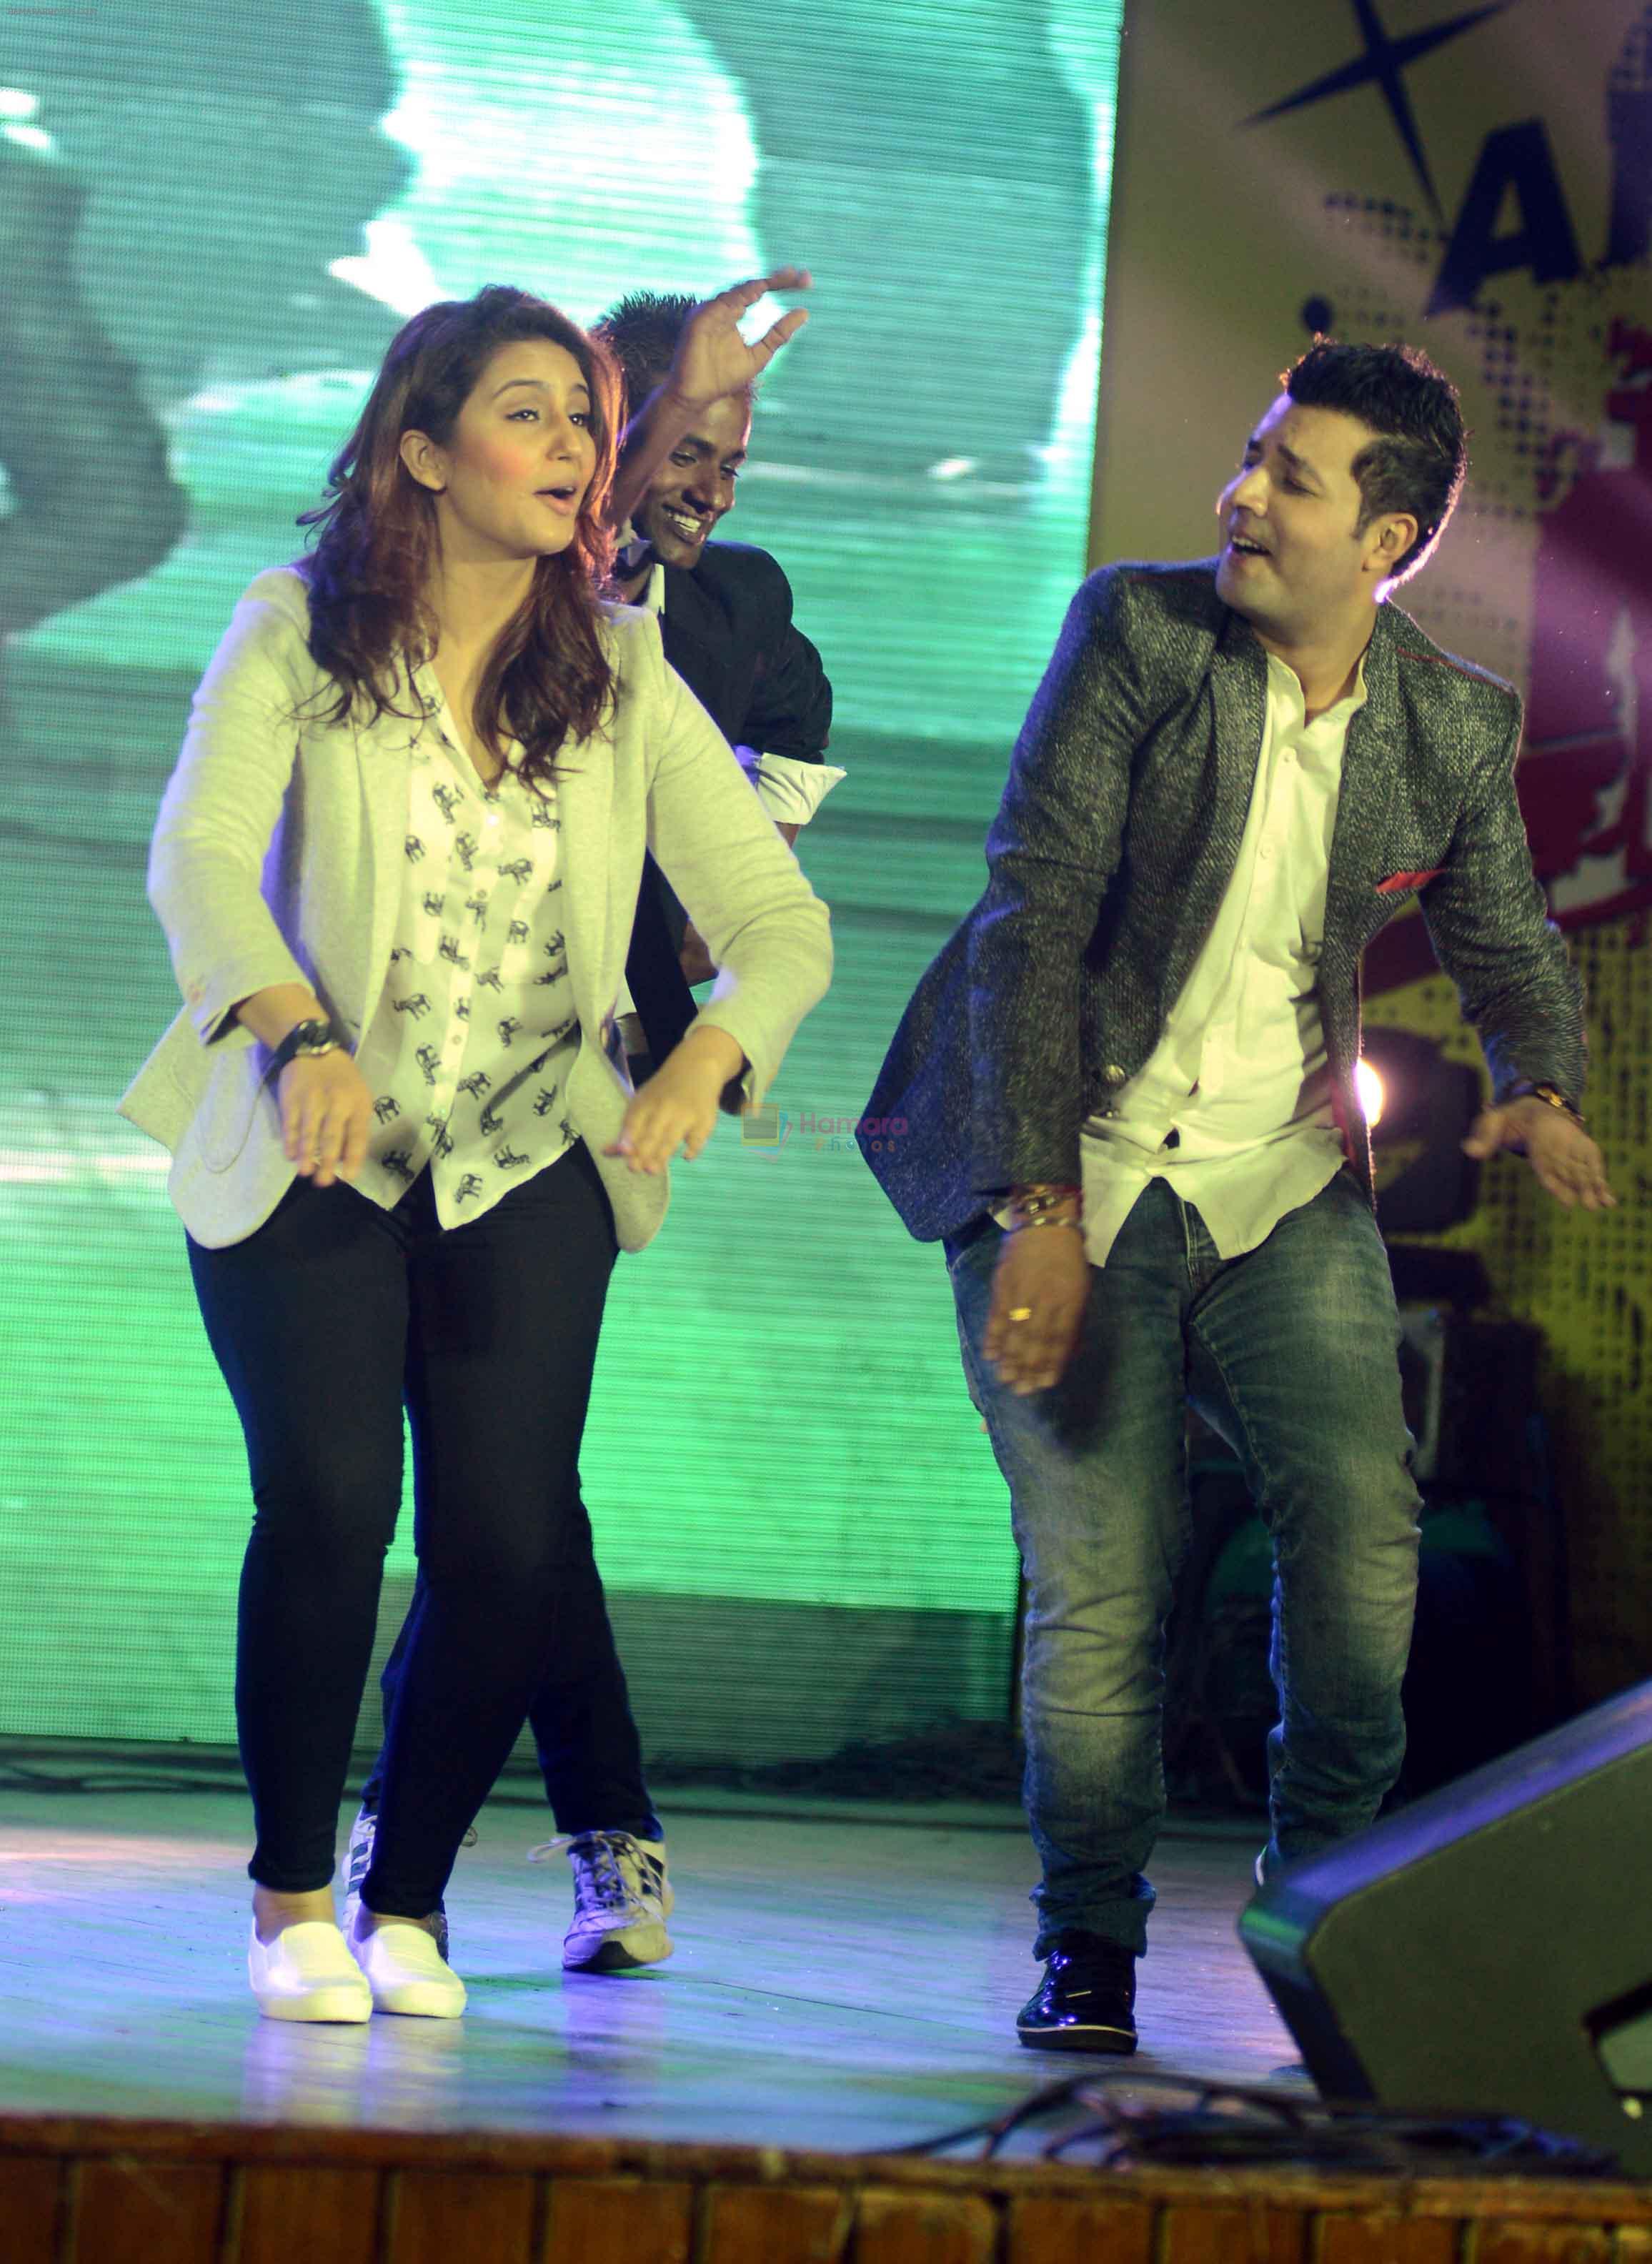 Huma Qureshi, Varun Sharma during the KCC Institute of Technology and Management celcbrated Annual Fest-2014 at Sri Fort Auditorium in New Delhi on 7th Nov 2014